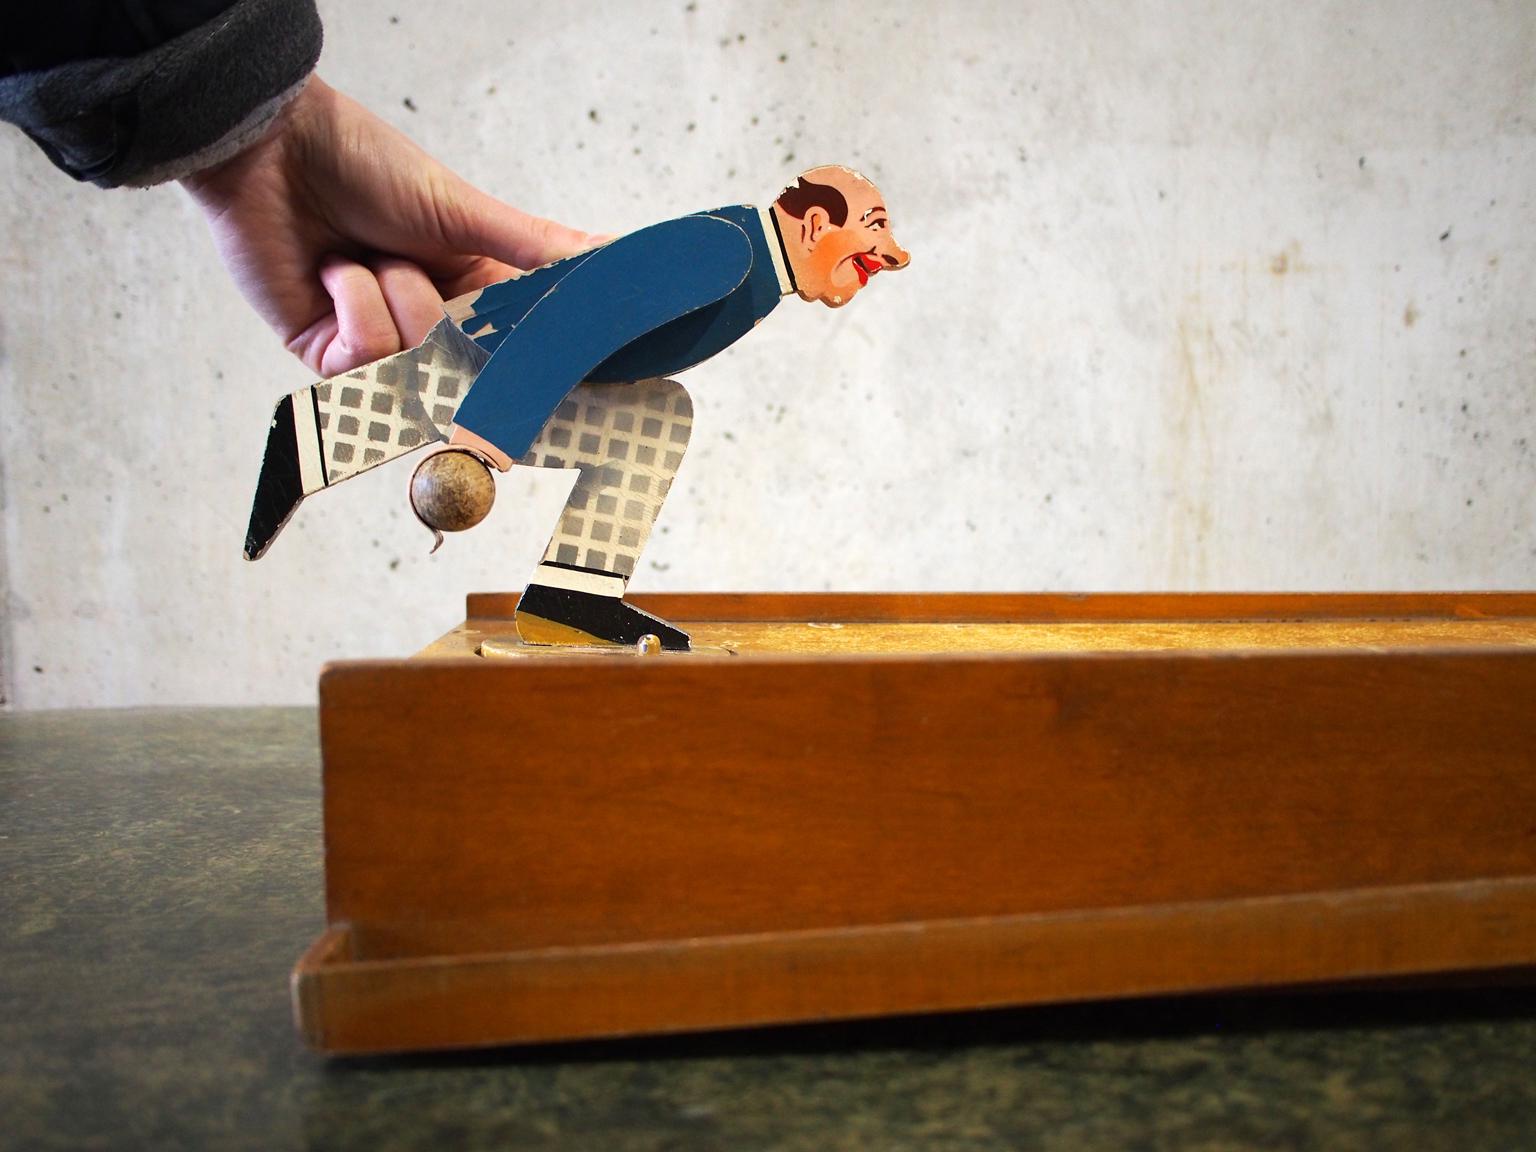 Mid-Century Modern Old Table Cone ‘Table Bowling’ Game from the 20th Century